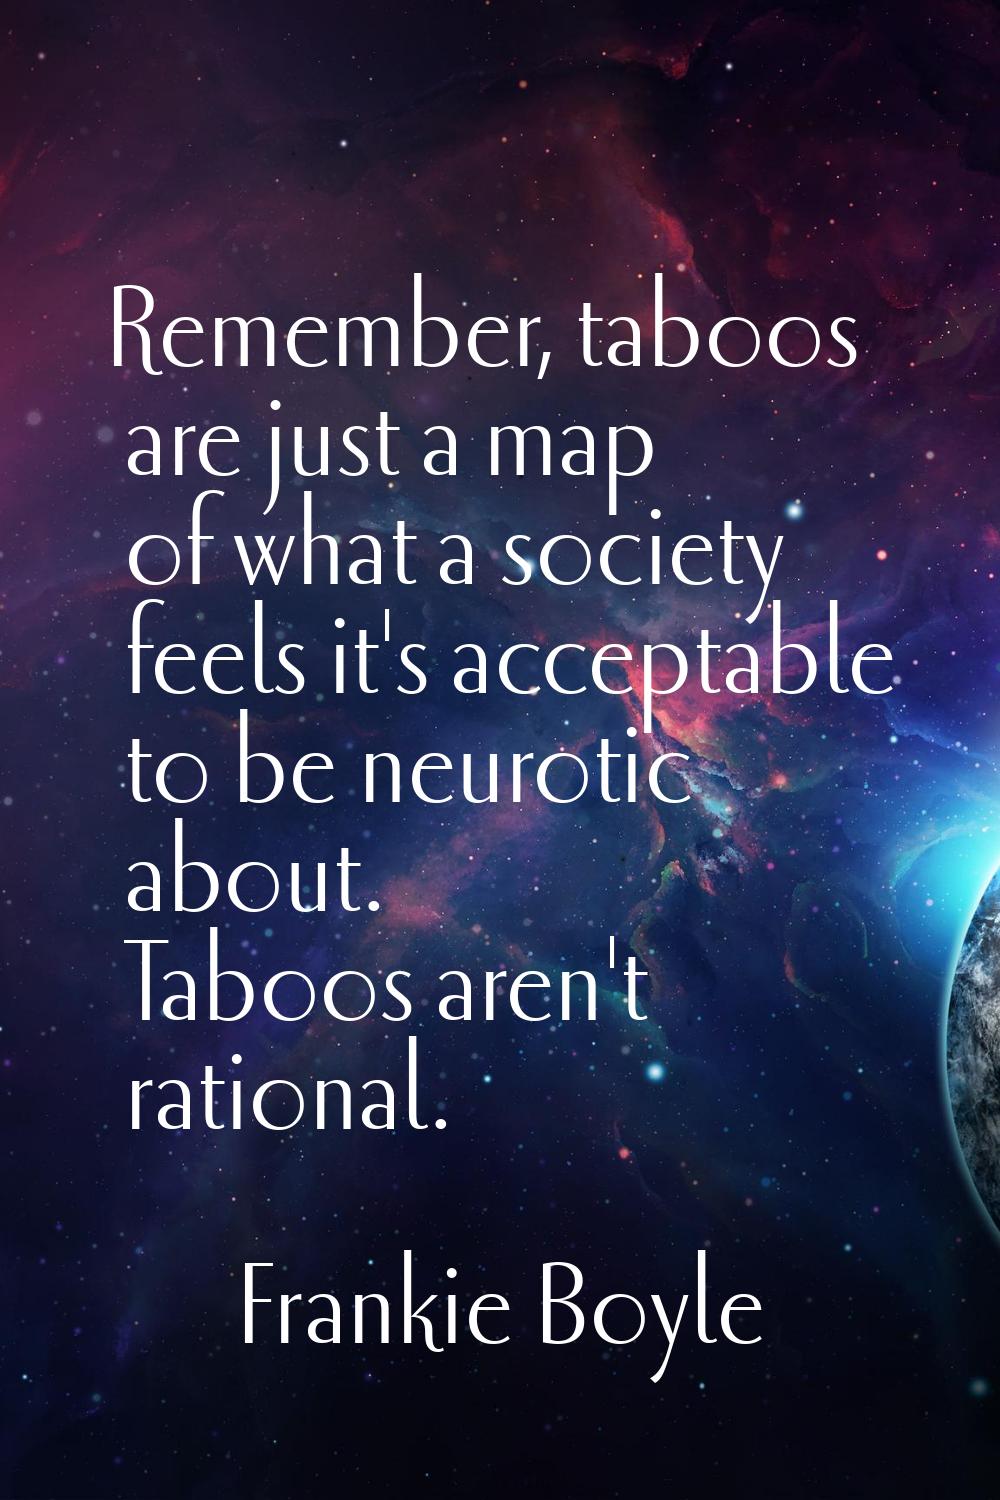 Remember, taboos are just a map of what a society feels it's acceptable to be neurotic about. Taboo